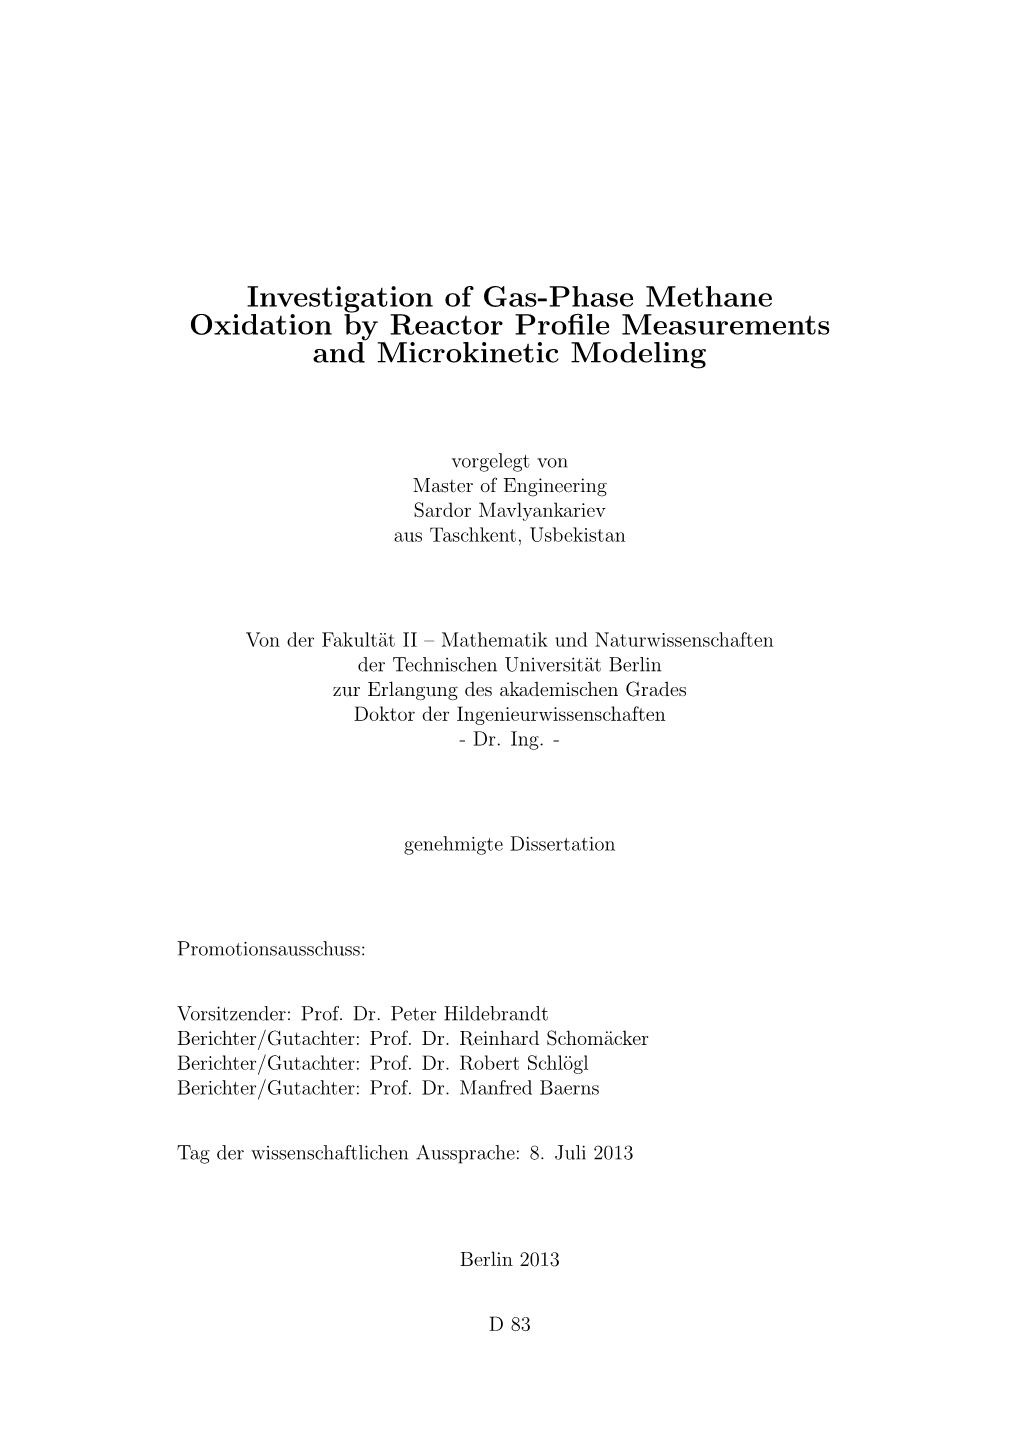 Investigation of Gas-Phase Methane Oxidation by Reactor Profile